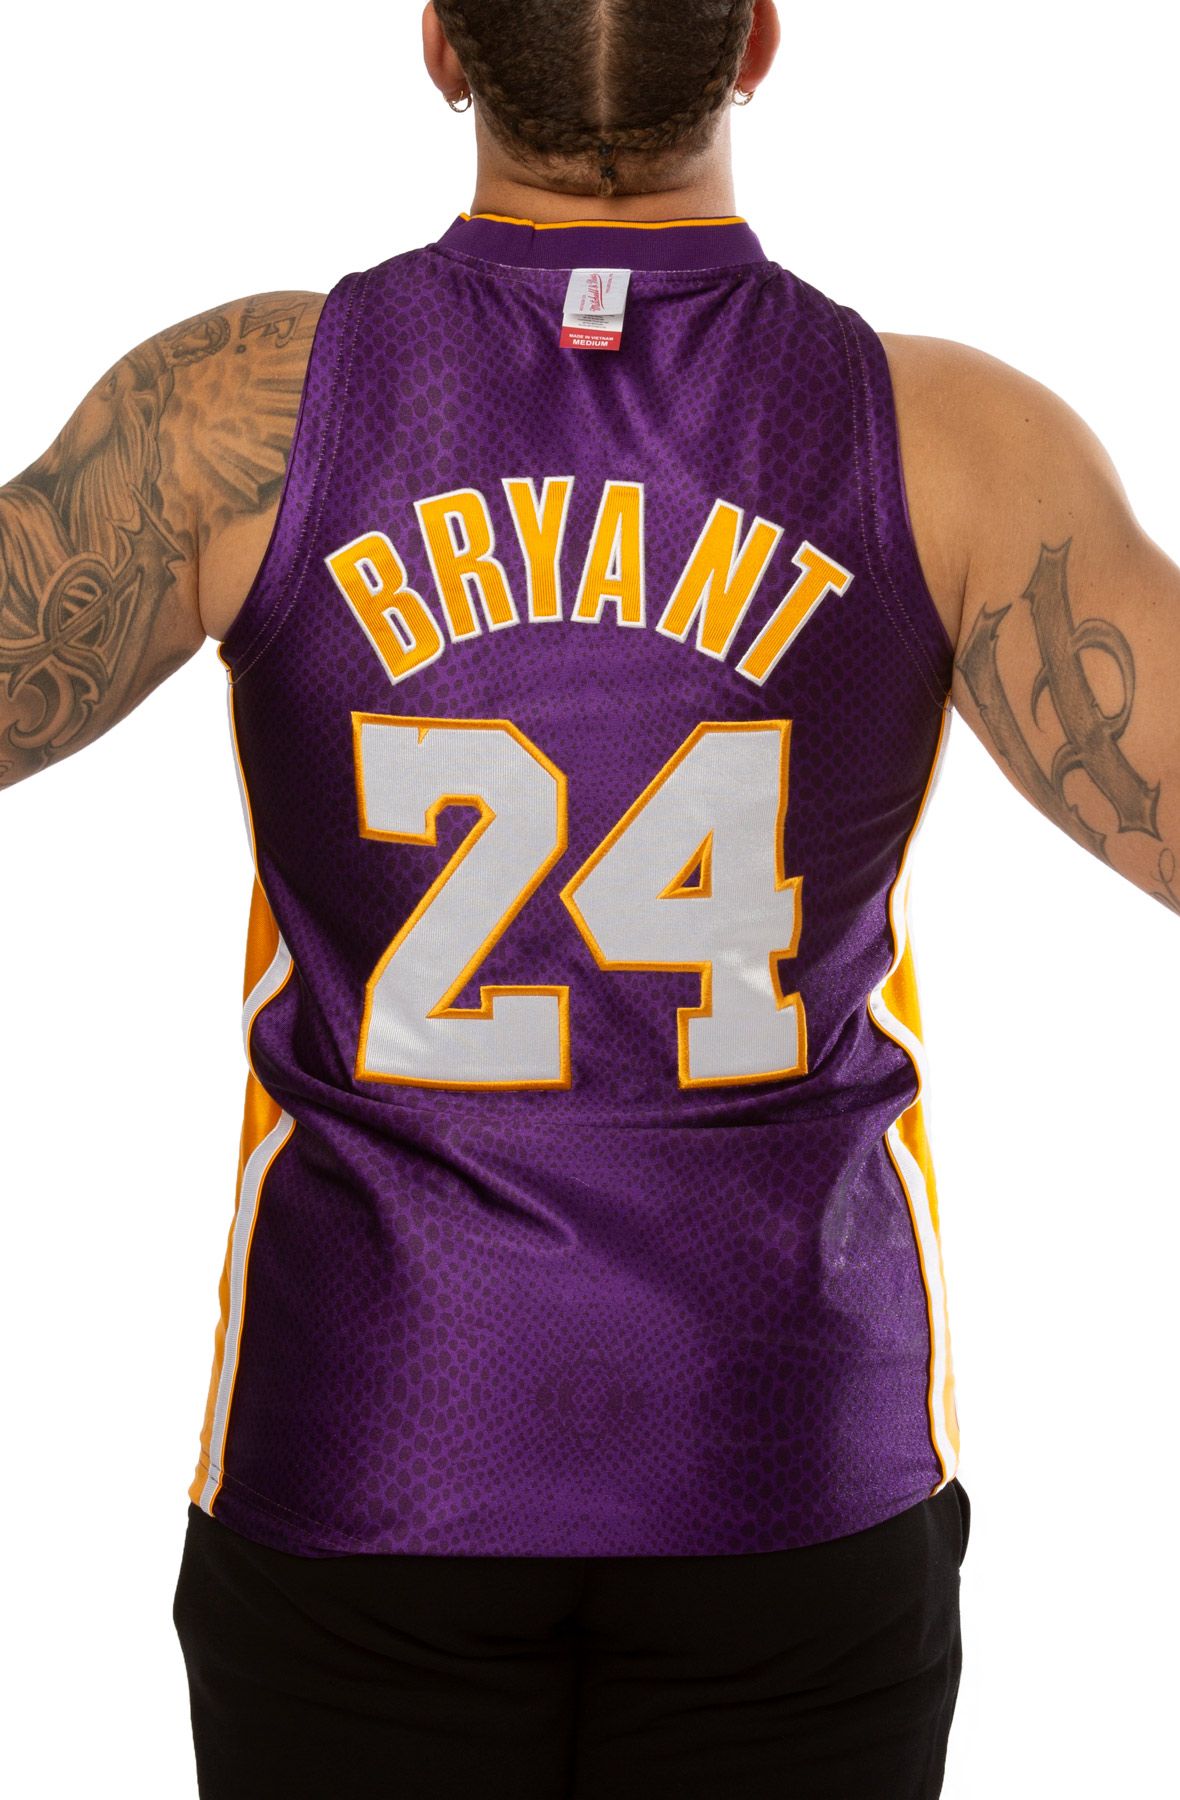 MITCHELL & NESS Kobe Bryant Los Angeles Lakers Alternate 2004-05 Authentic  Jersey AJY4CP19005-LALLTBL04KBR - Karmaloop